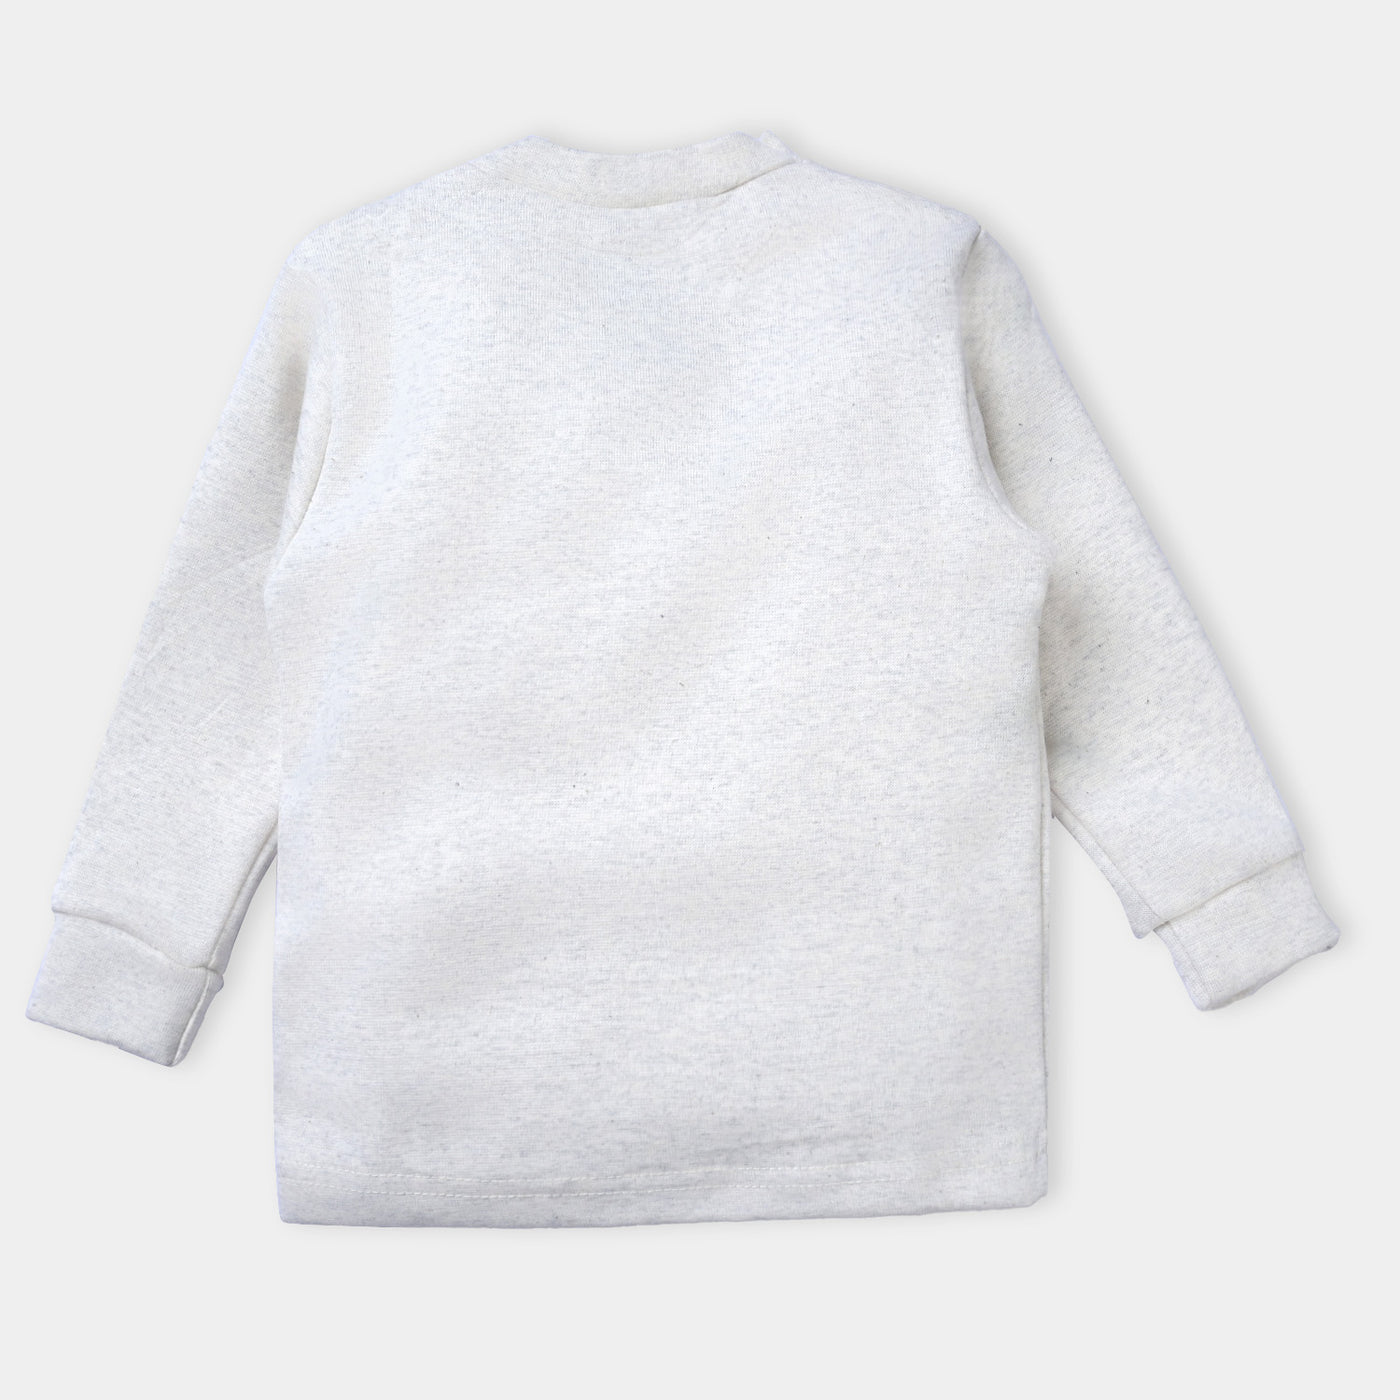 Infant Unisex Thermal Suit-Off White